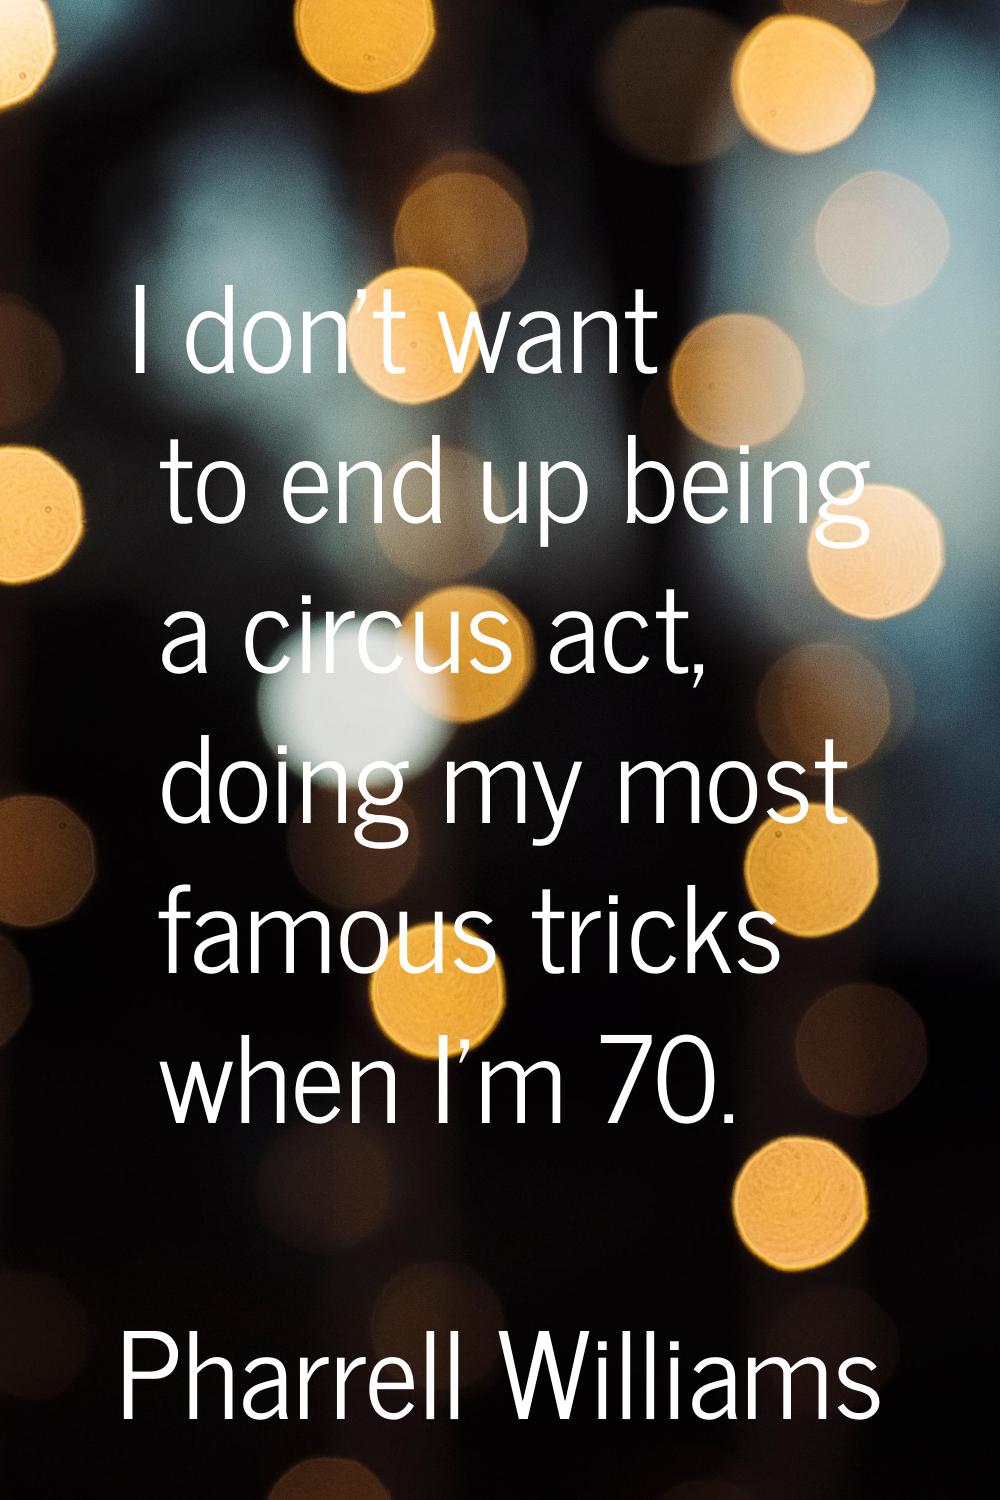 I don't want to end up being a circus act, doing my most famous tricks when I'm 70.